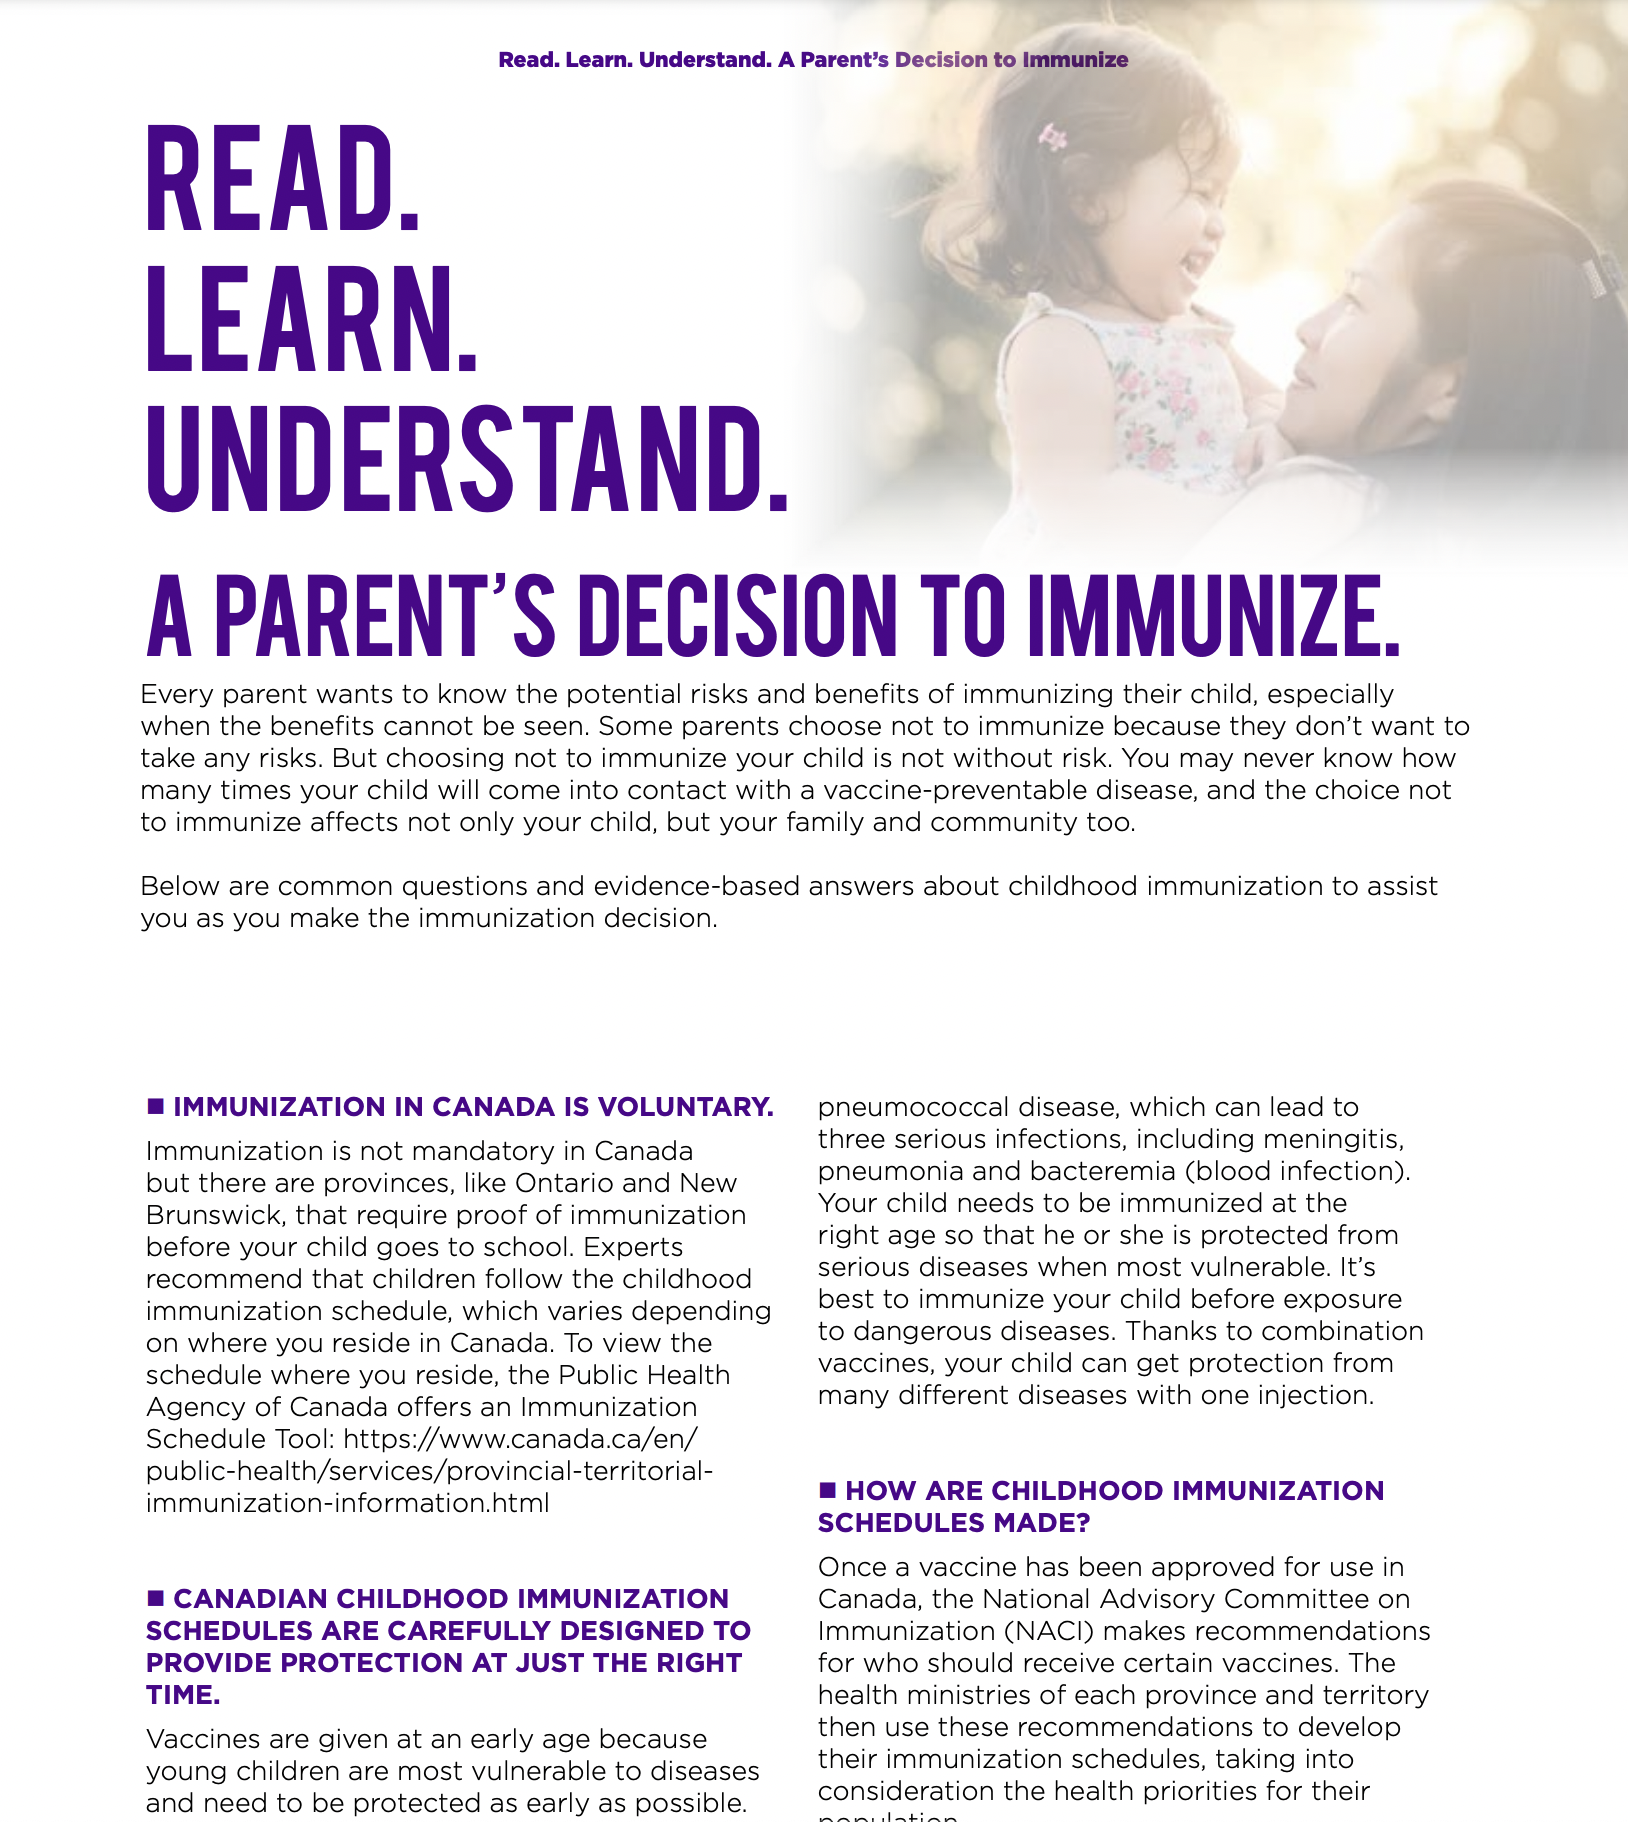 Read. Learn. Understand. A Parent’s Decision to Immunize